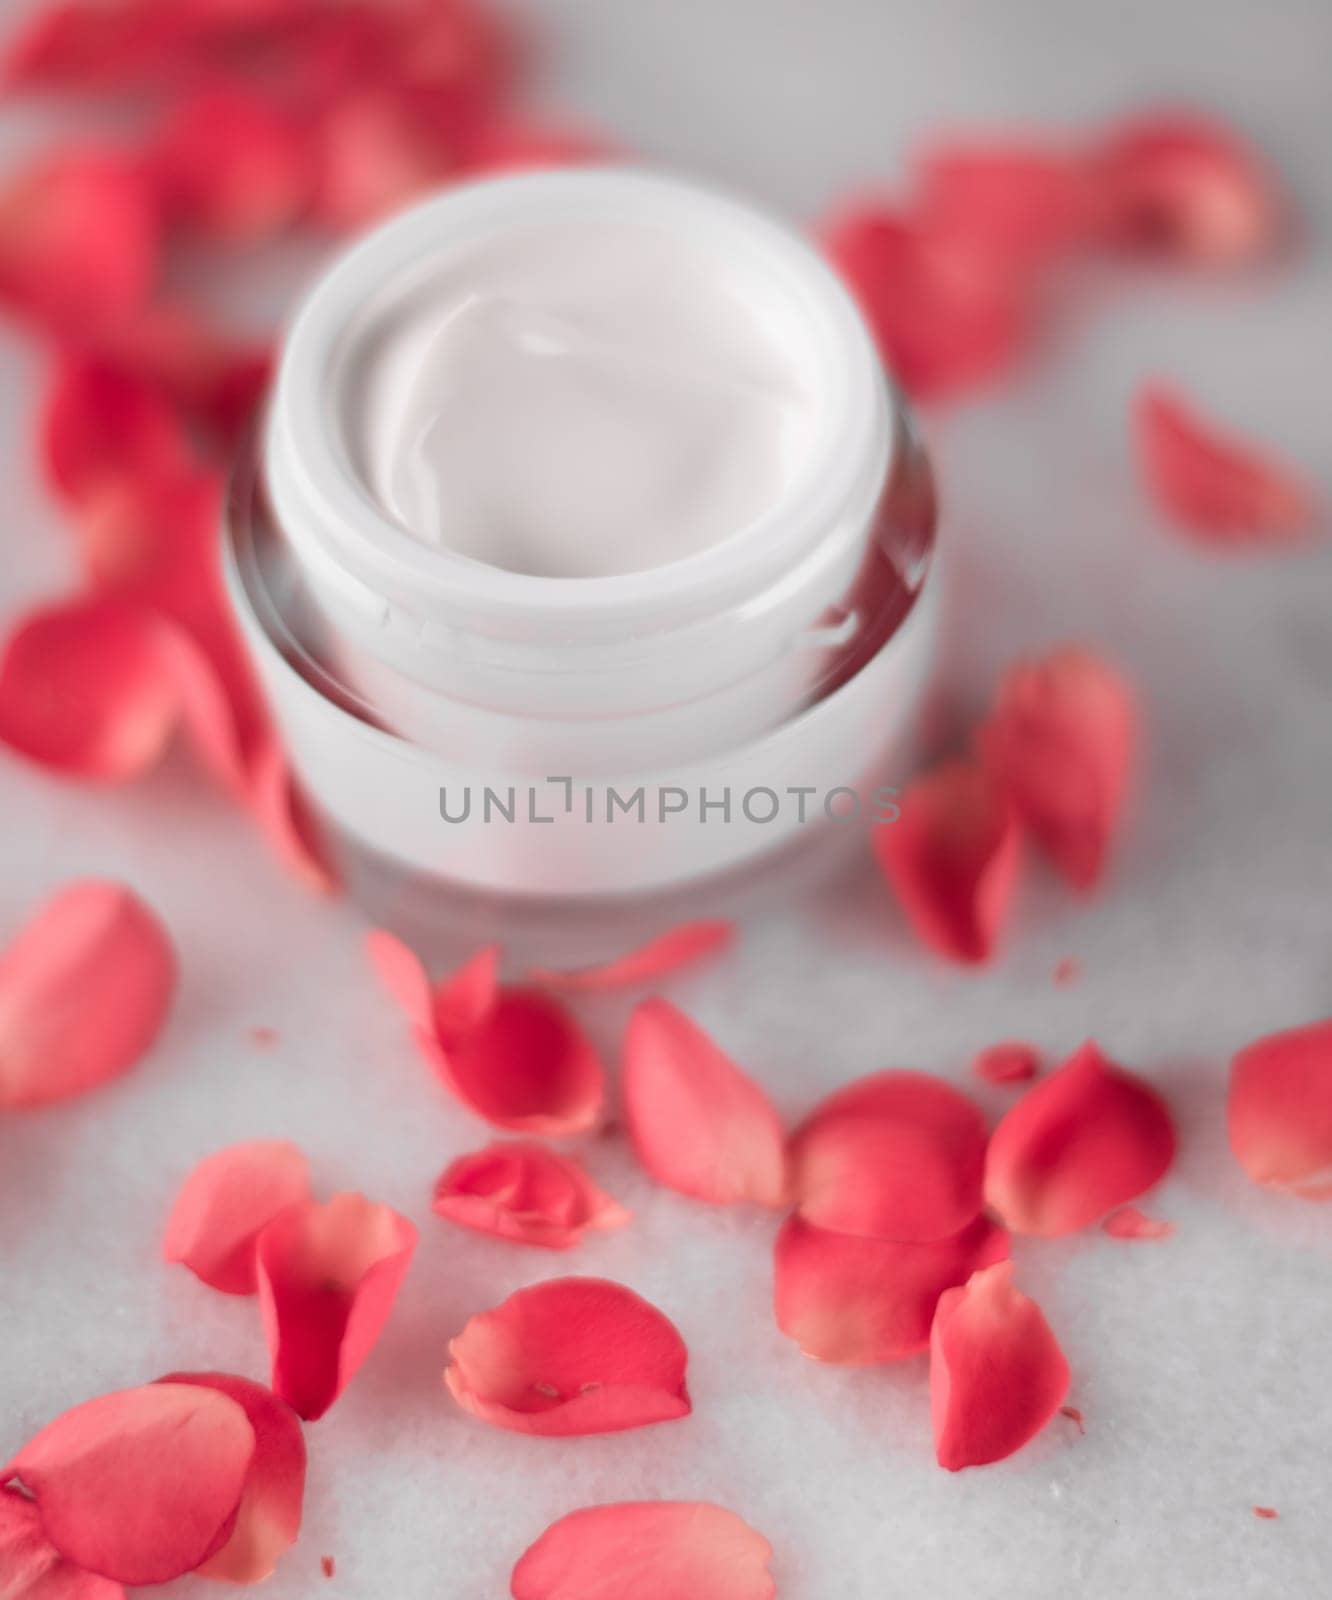 luxe face cream and rose petals - cosmetics with flowers styled beauty concept by Anneleven